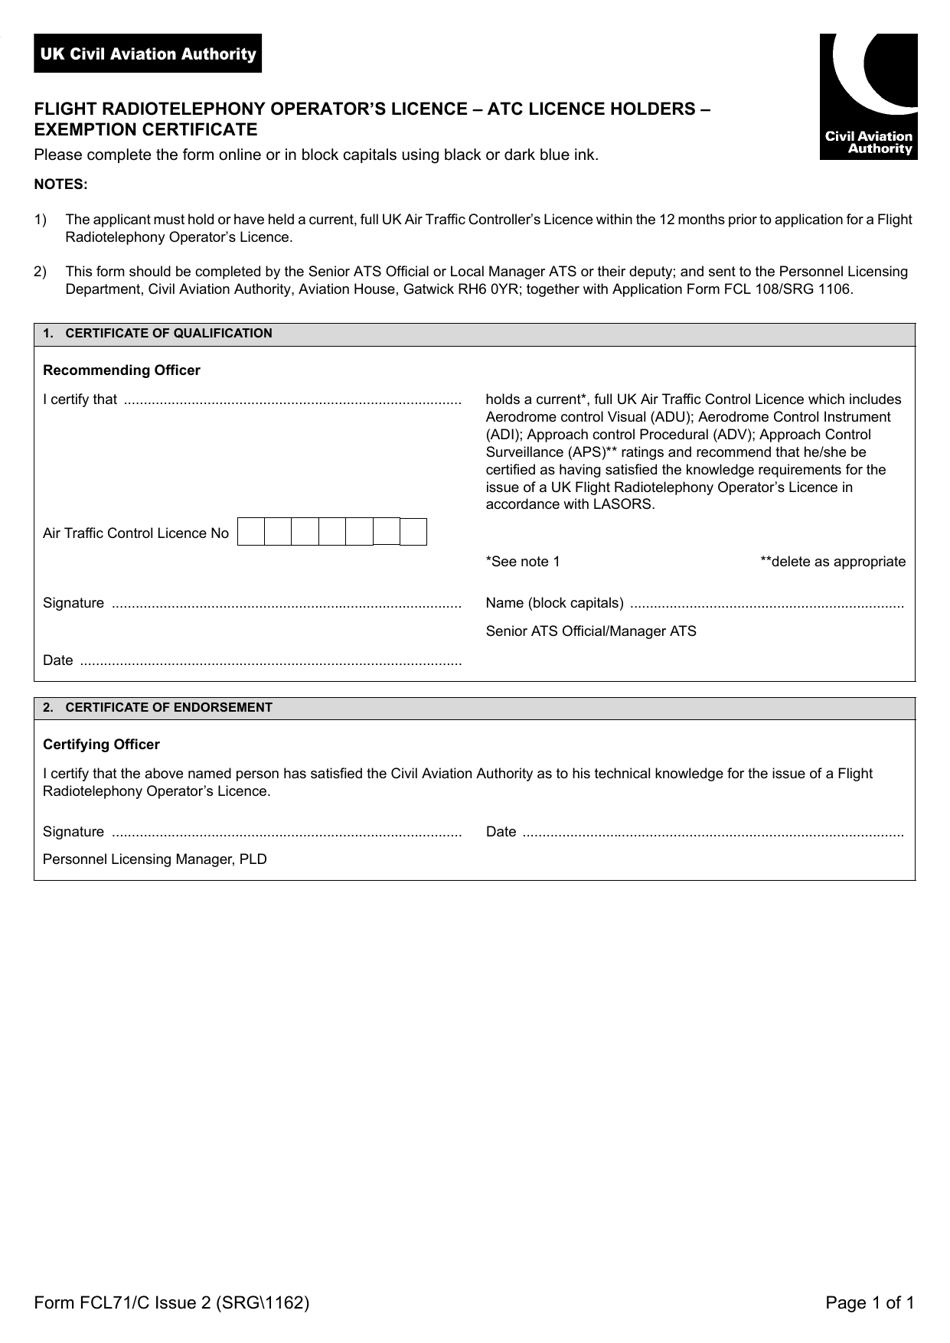 Form SRG 1162 (FCL71 / C) Flight Radiotelephony Operators Licence - Atc Licence Holders - Exemption Certificate - United Kingdom, Page 1